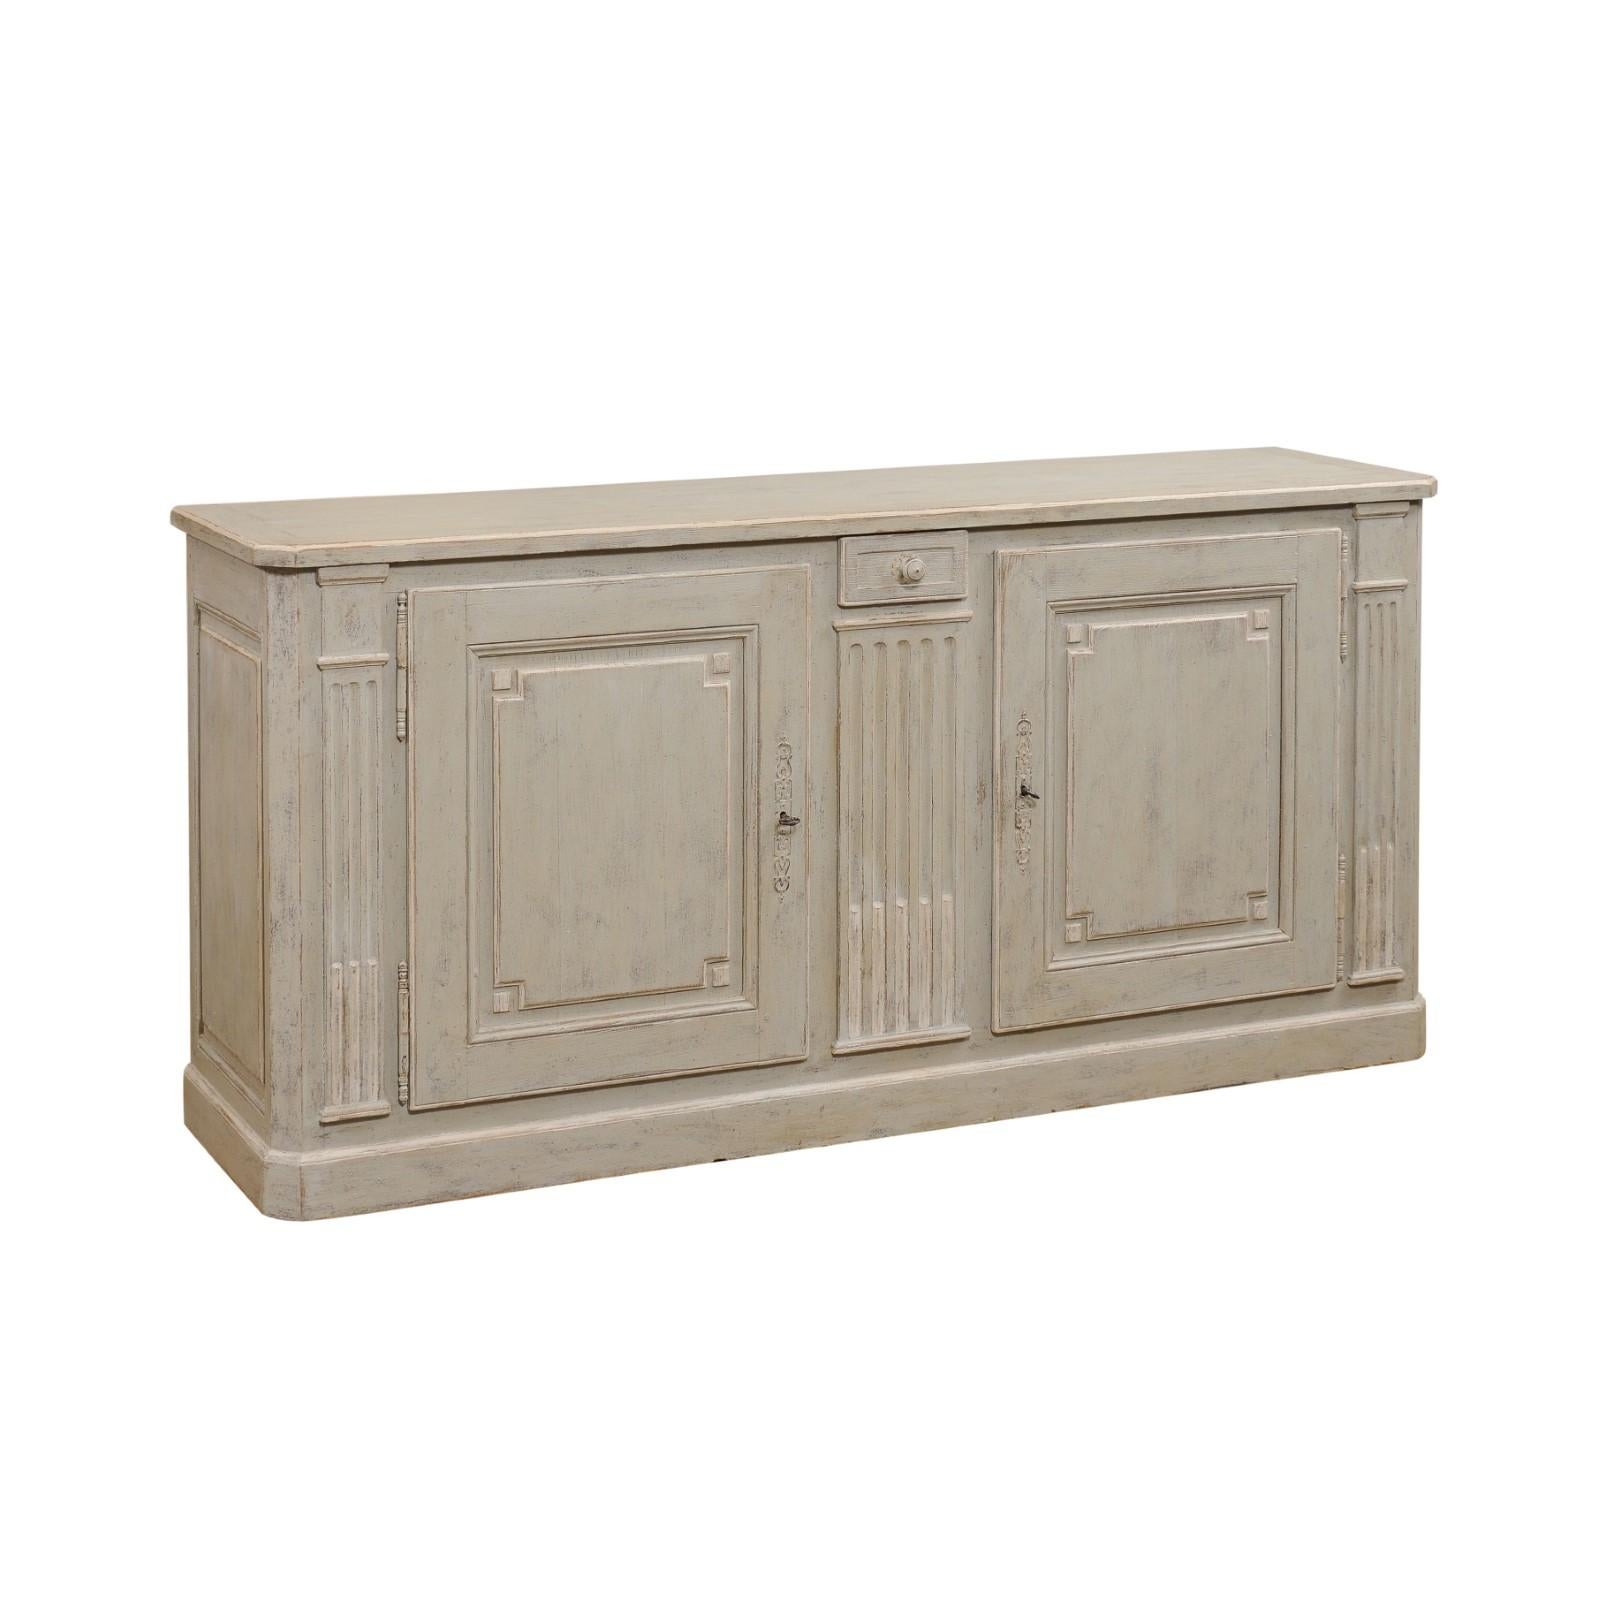 French Louis XVI Style Painted Buffet with Doors, Drawers and Carved Pilasters 8